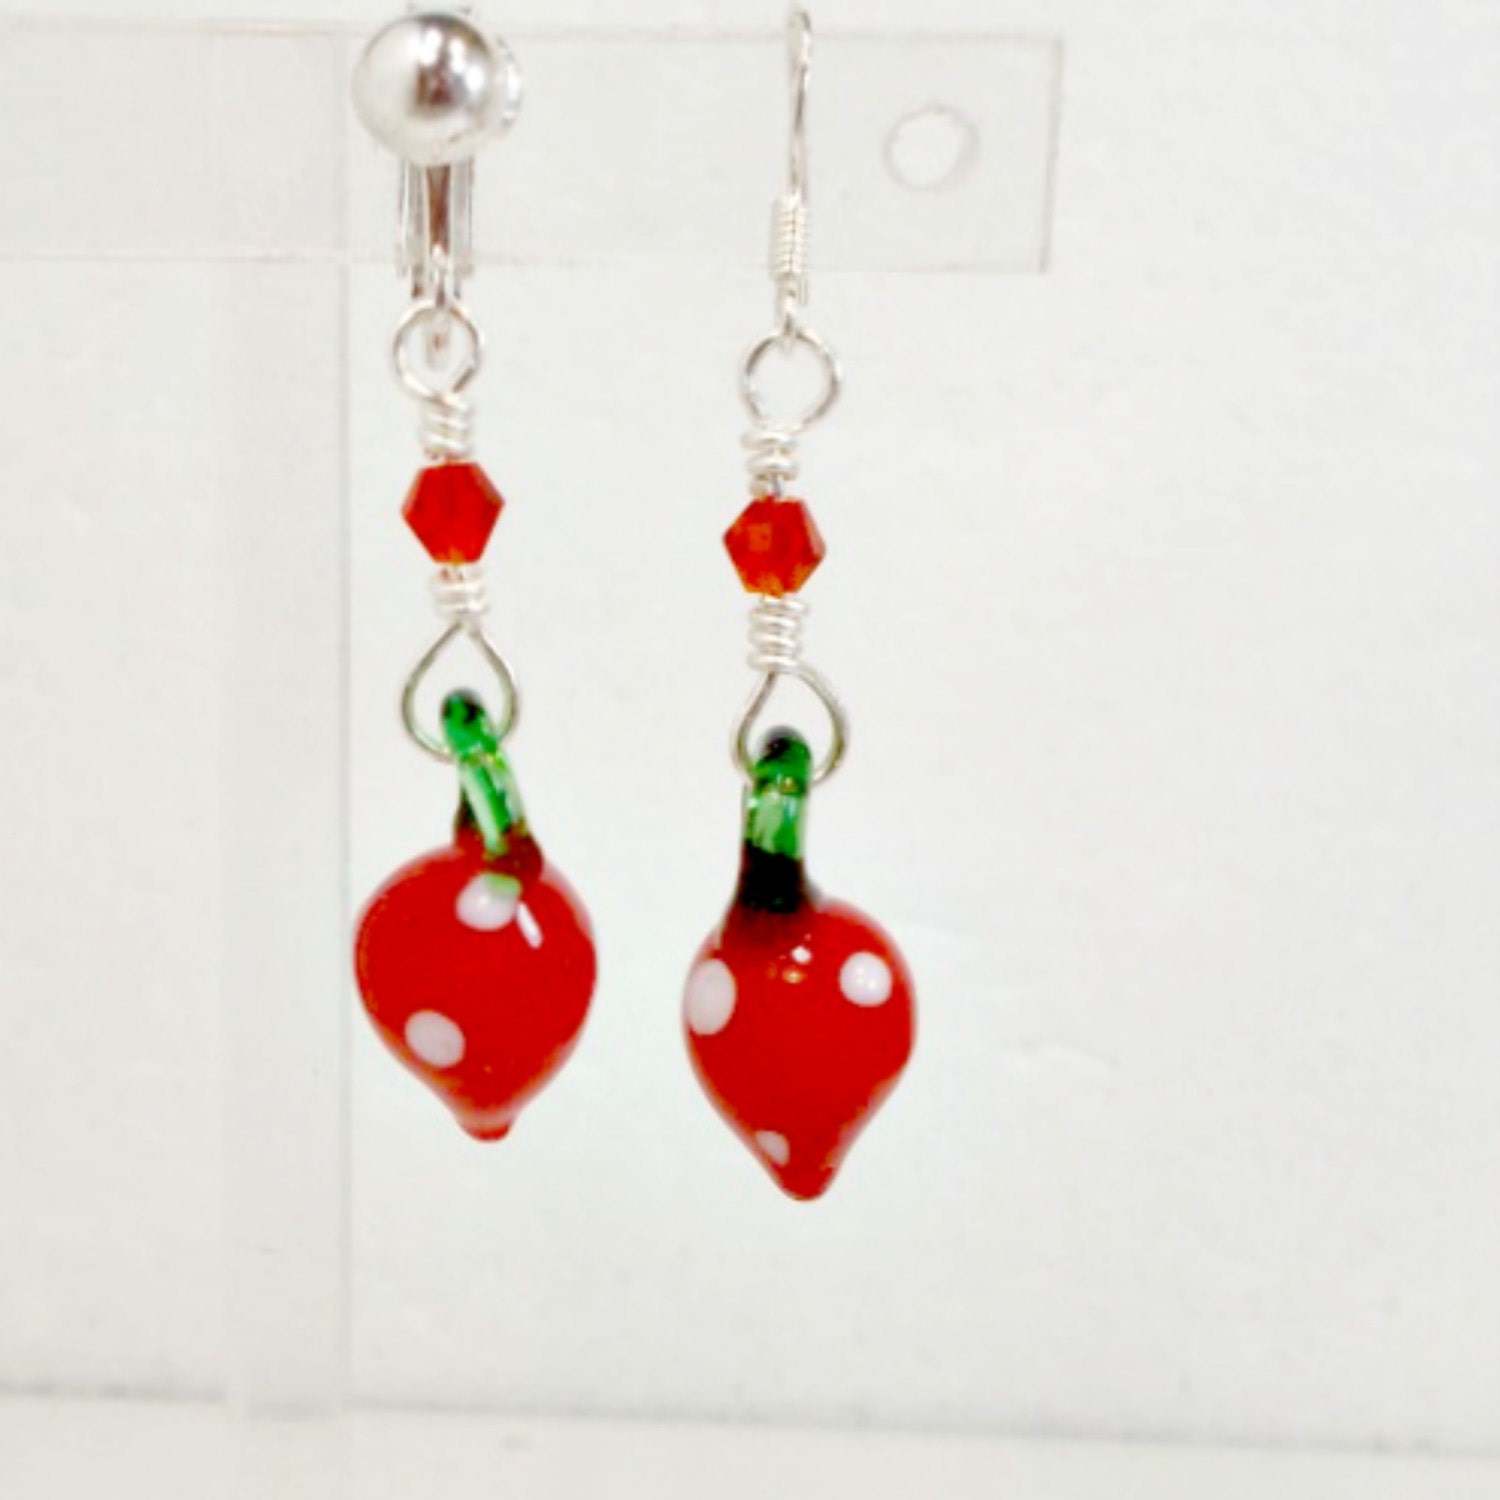 Earrings strawberry bead dangles glass clip or by RememberThis3